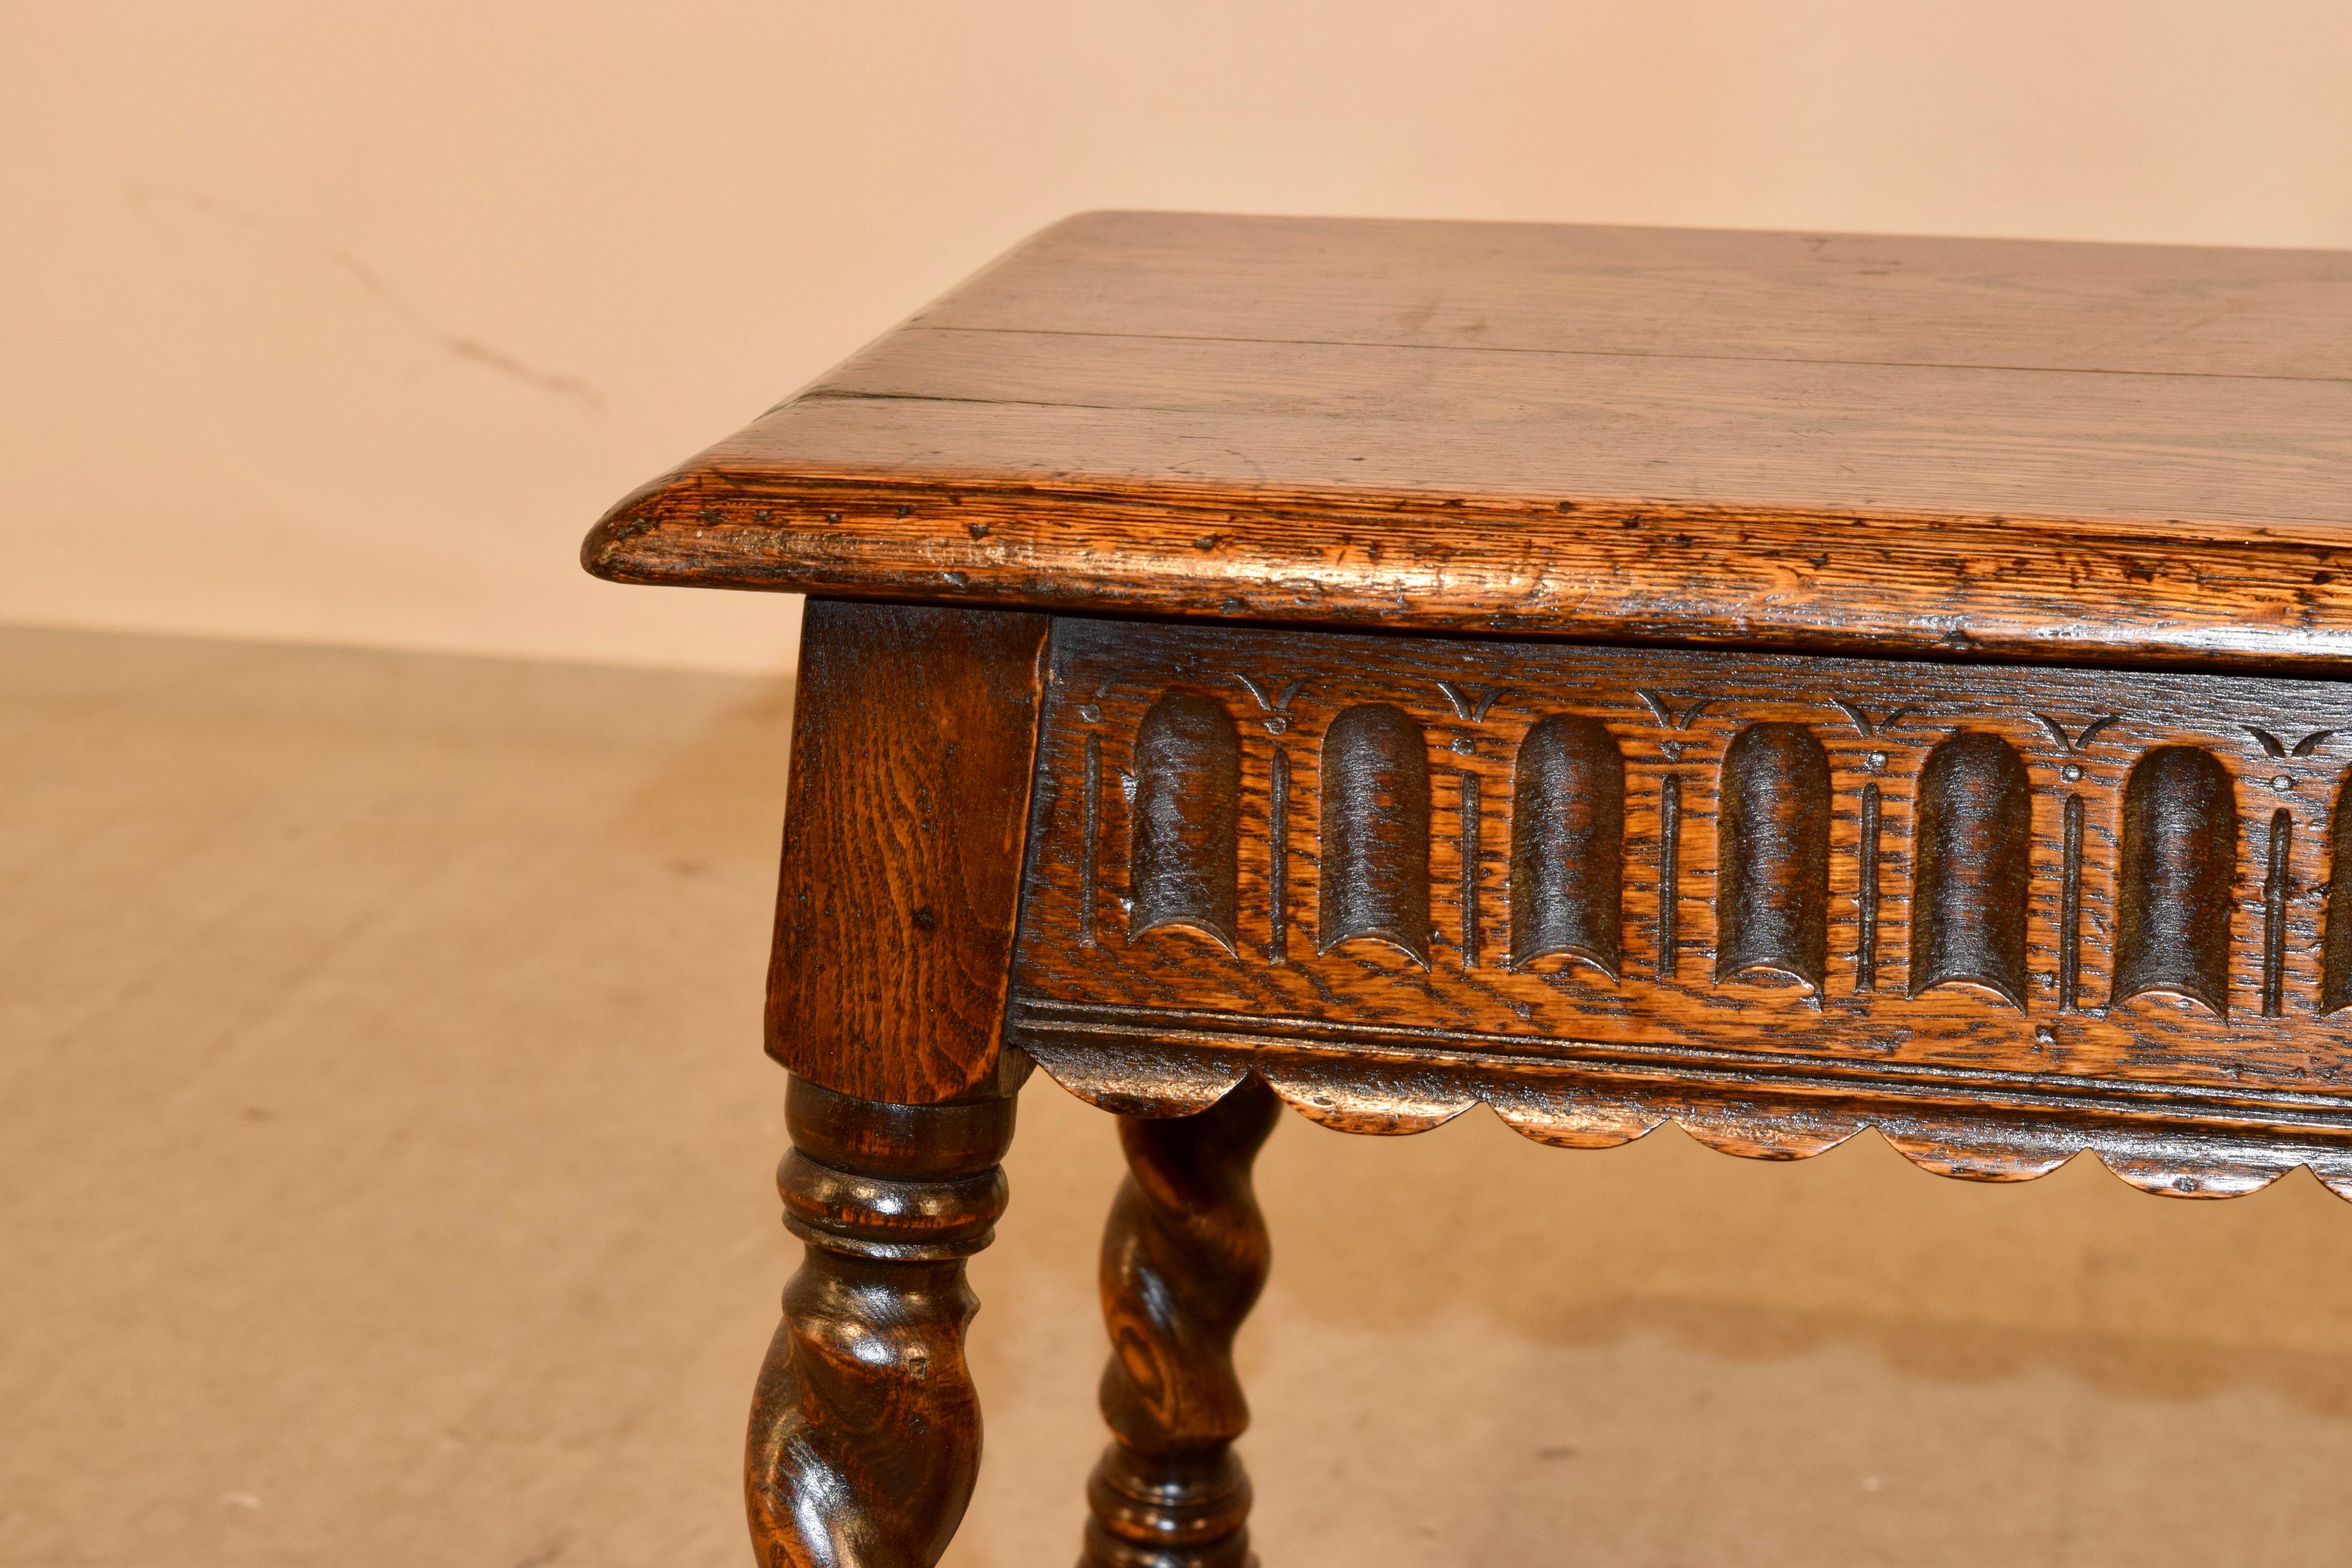 19th Century English Oak Joint Stool For Sale 1